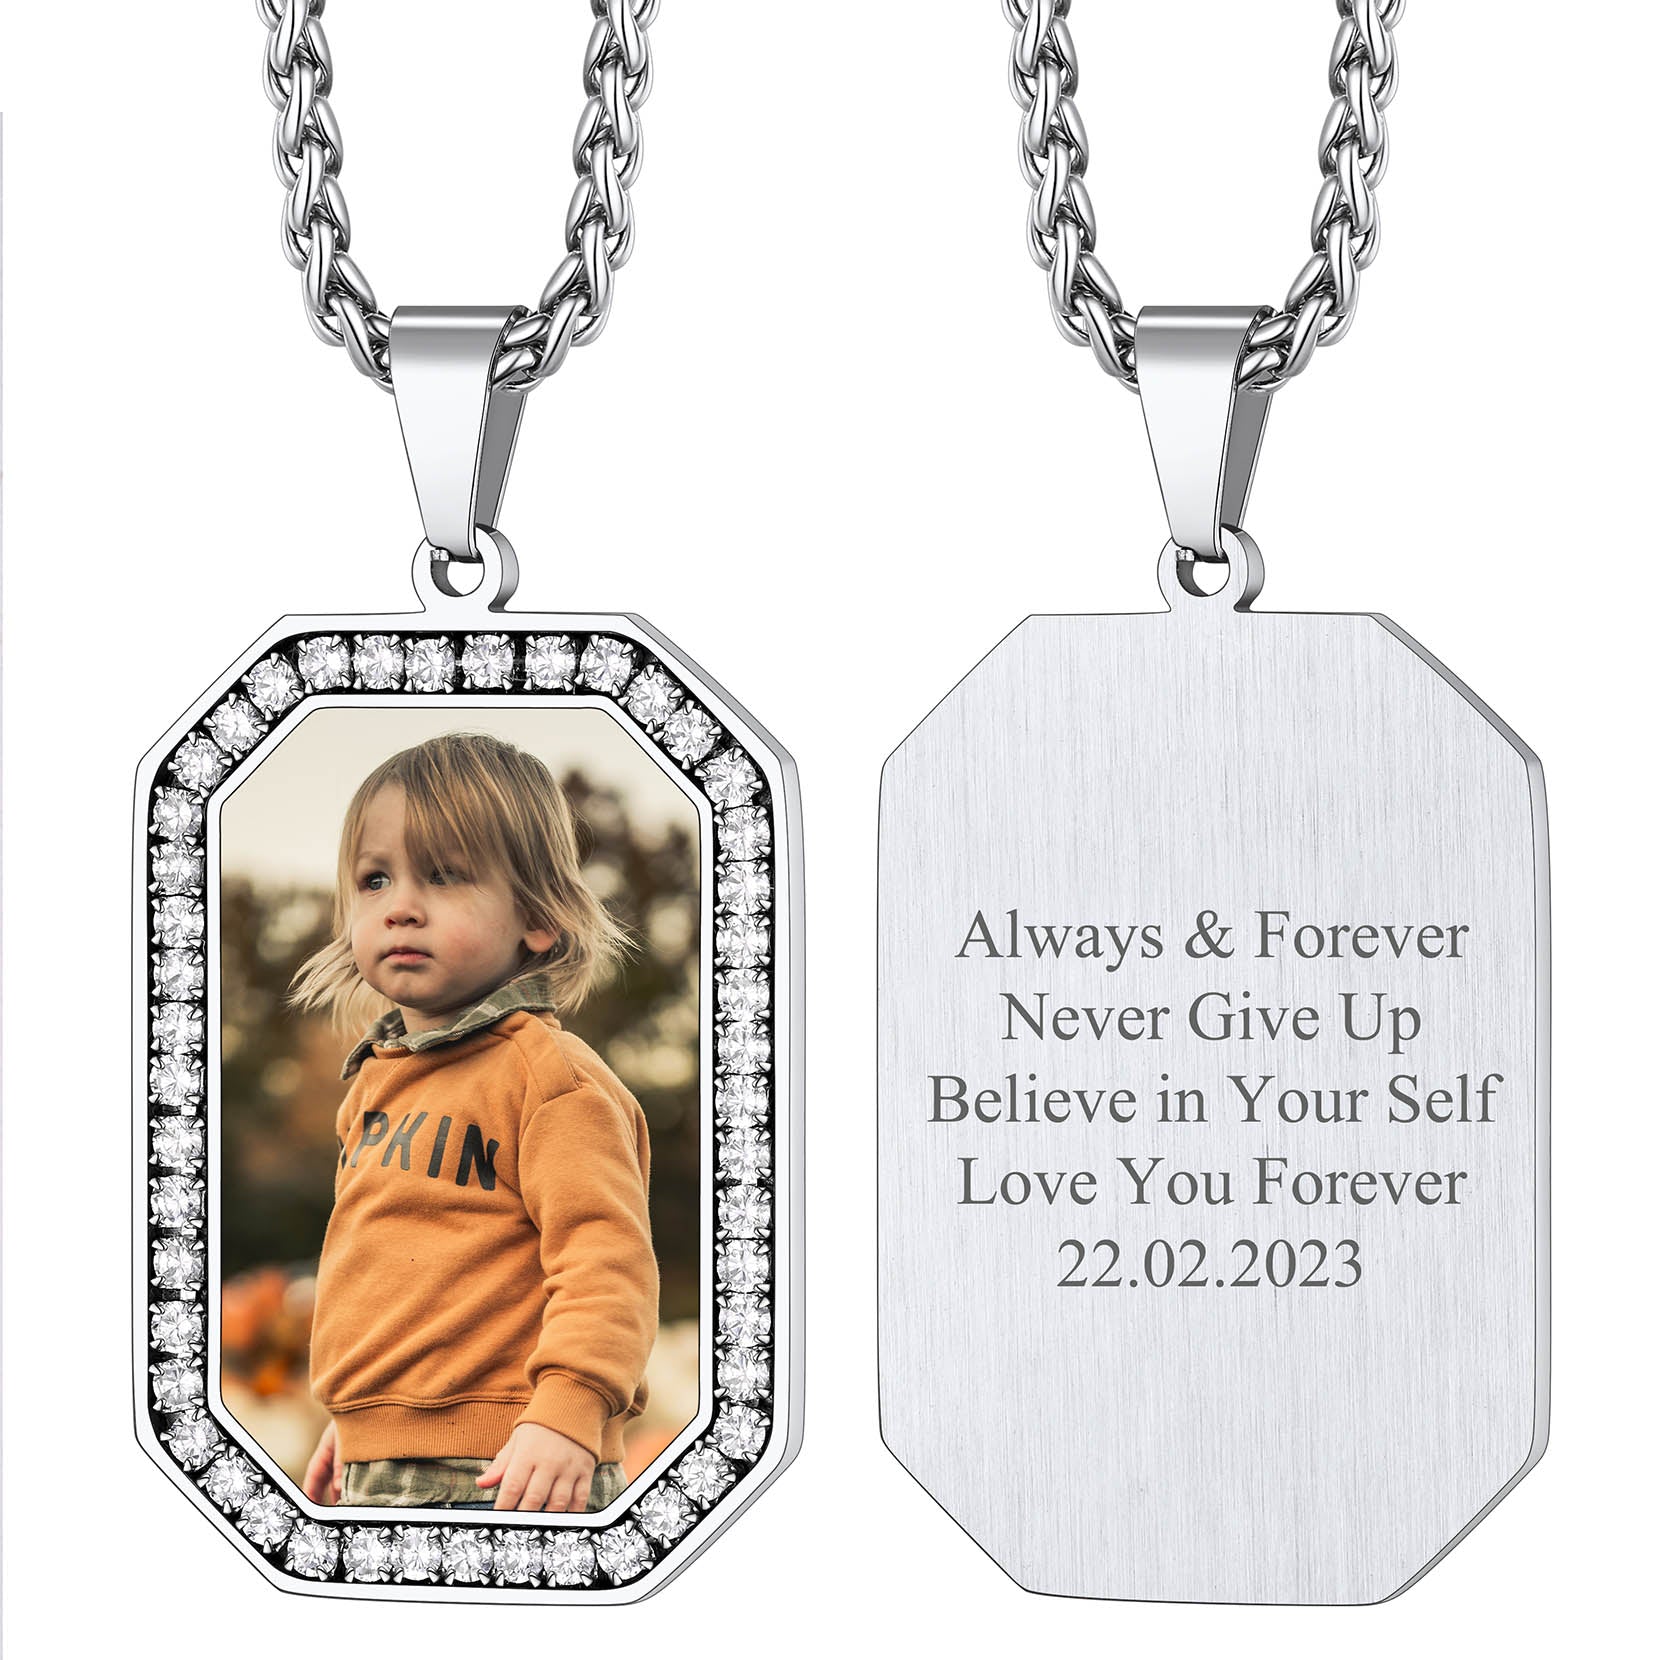 Customized Engraved Picture Dog Tag Necklace for Men/Women FaithHeart